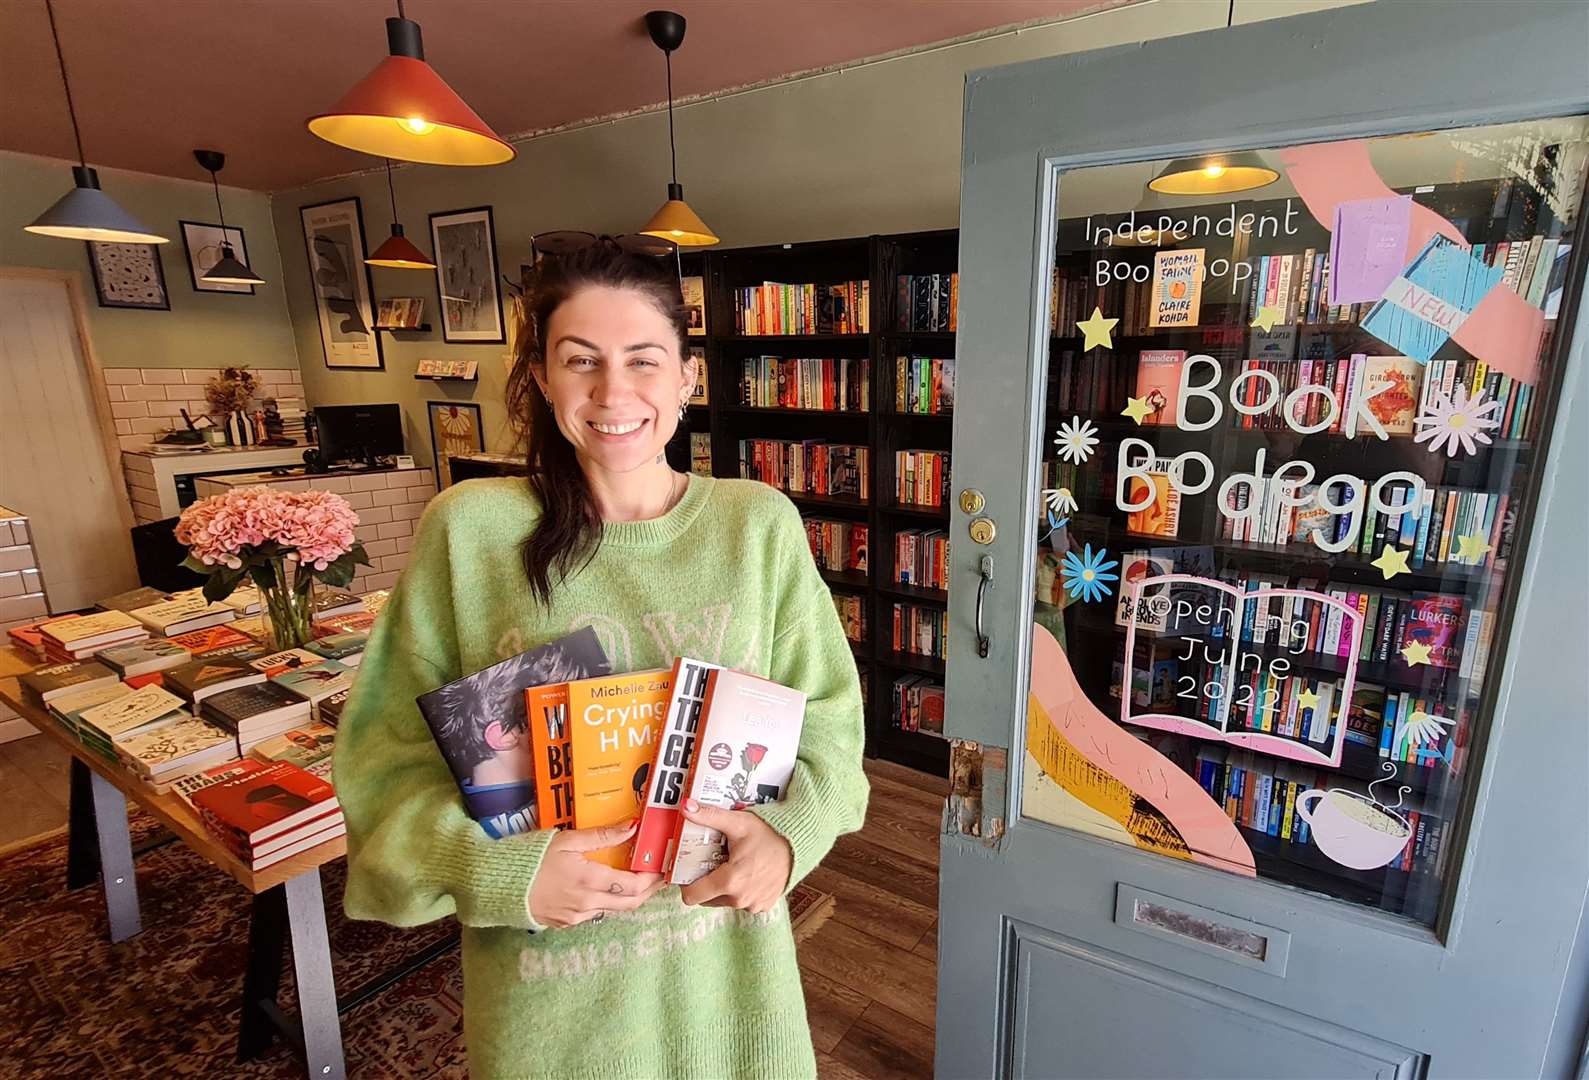 Sapphire Bates in her new book shop, Book Bodega in Harbour Street, Ramsgate